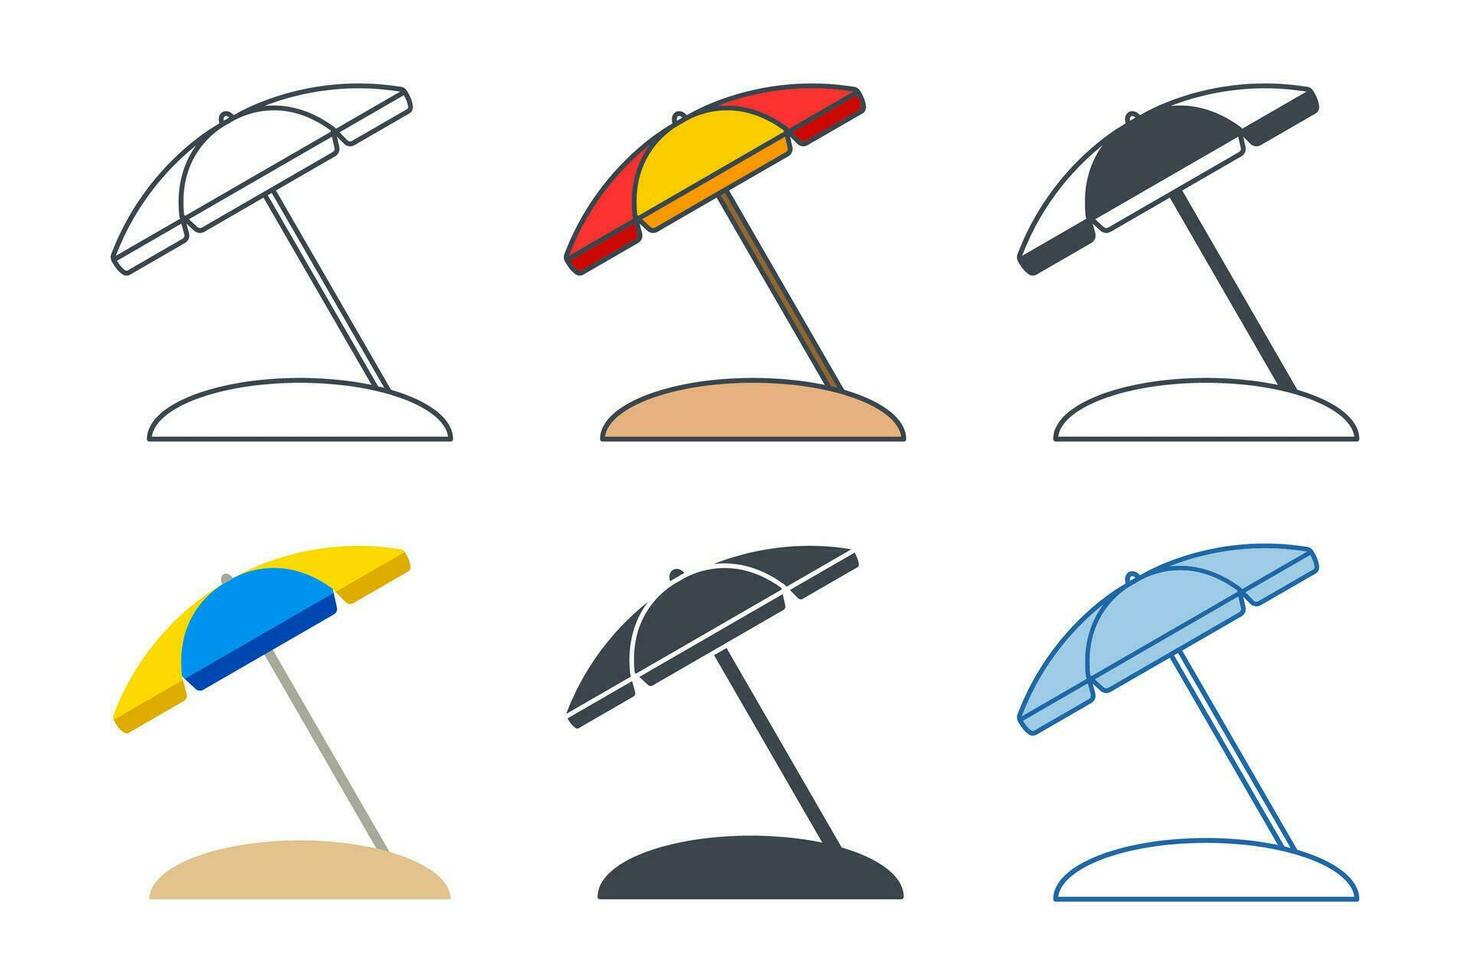 Beach Umbrella icon collection with different styles. Beach Umbrella icon symbol vector illustration isolated on white background